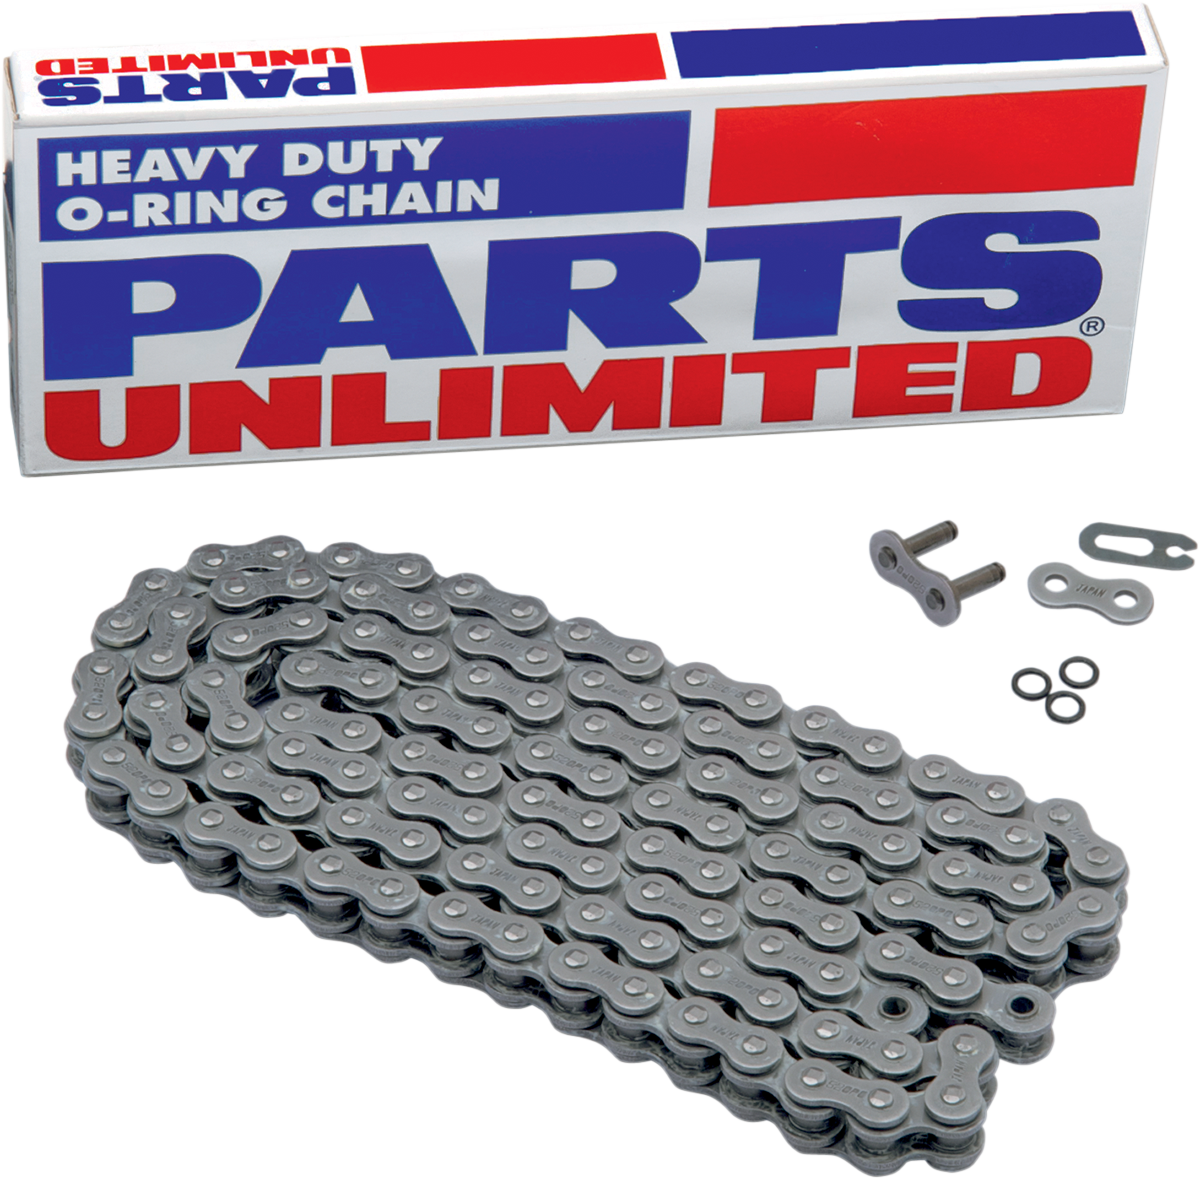 PARTS UNLIMITED-CHAIN MOTORCYCLE CHAIN CHAIN PU 525 O-RNG X 110L